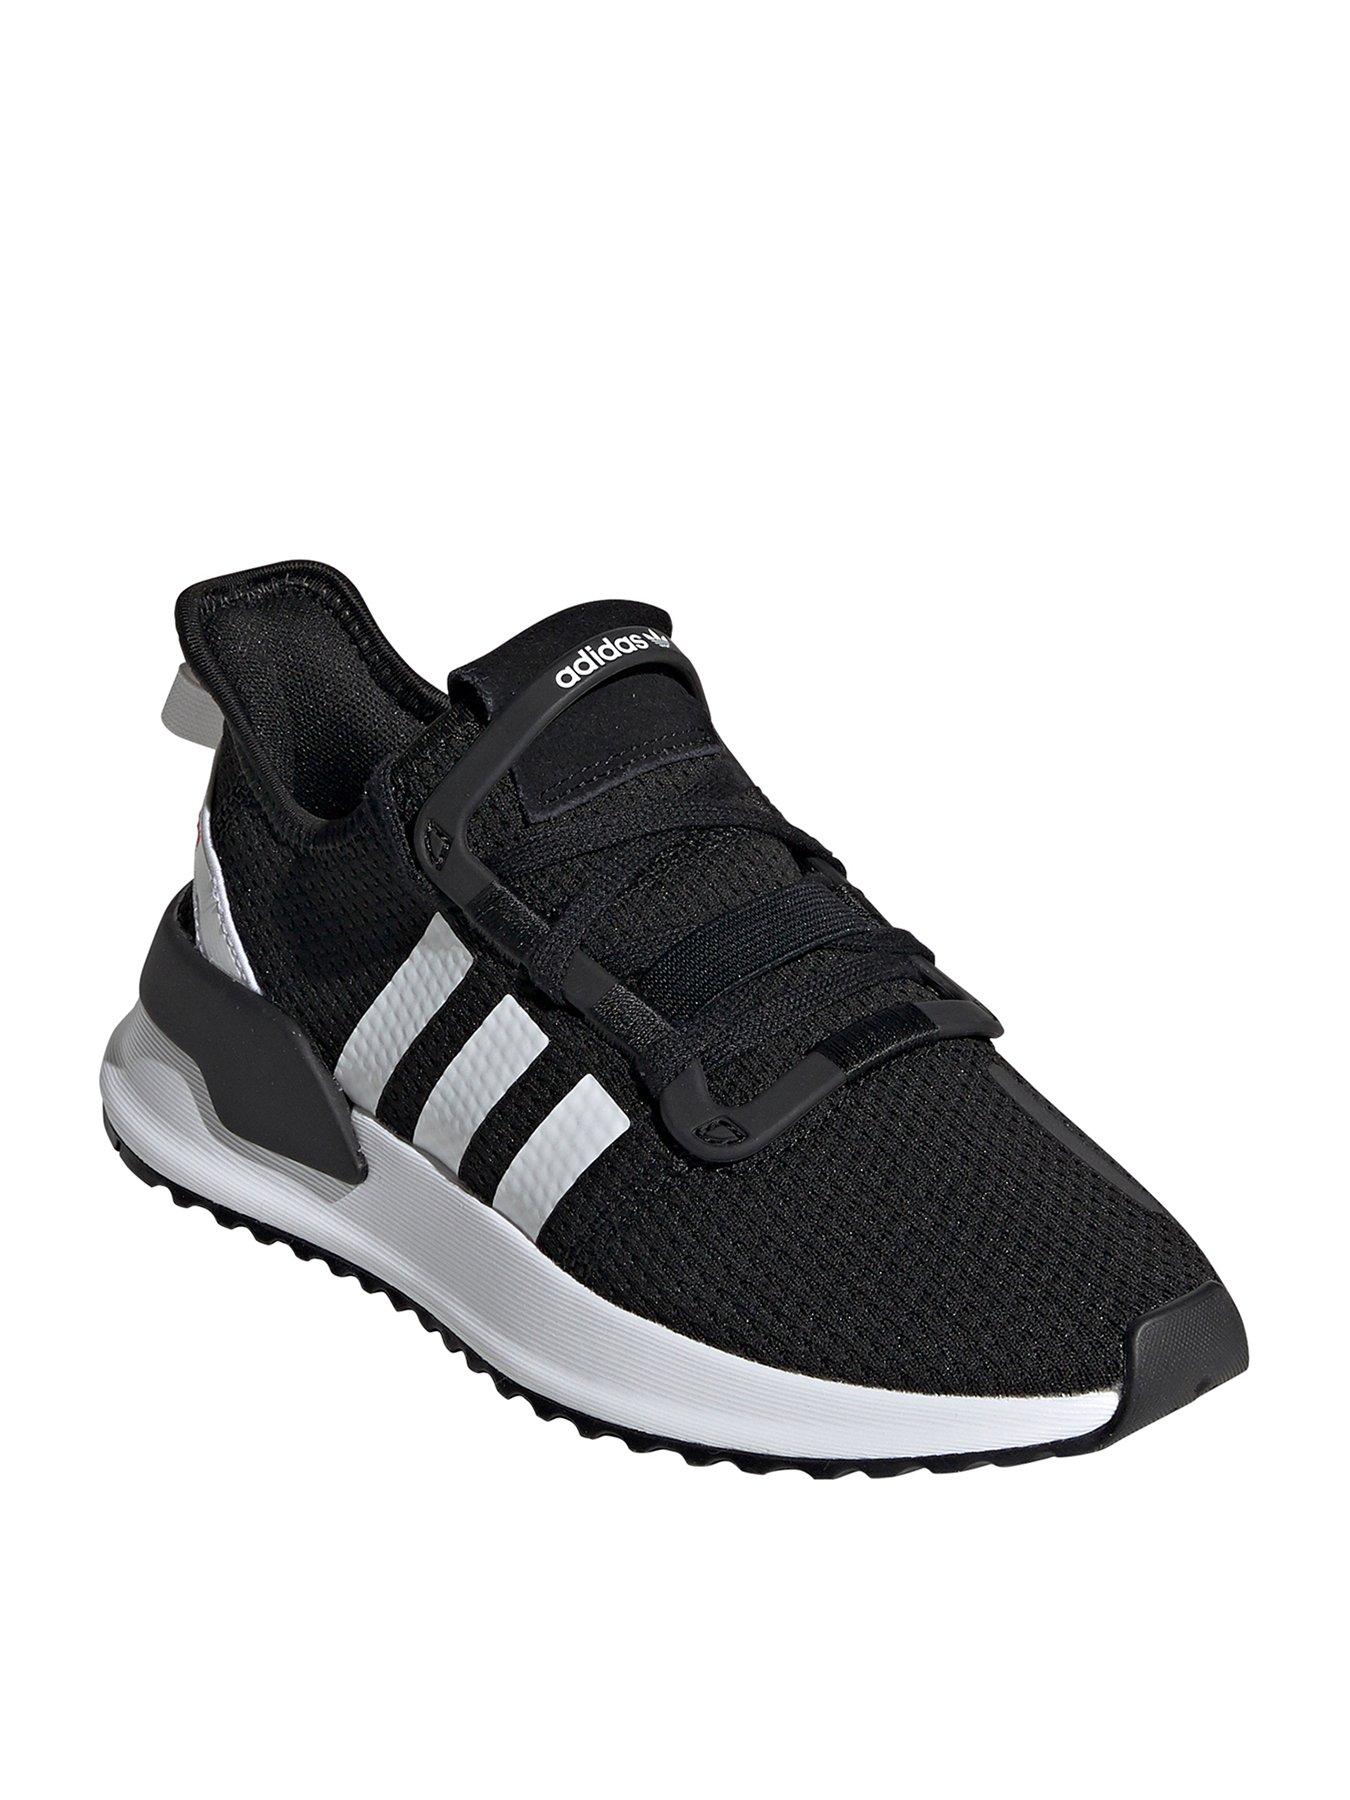 adidas trainer offers